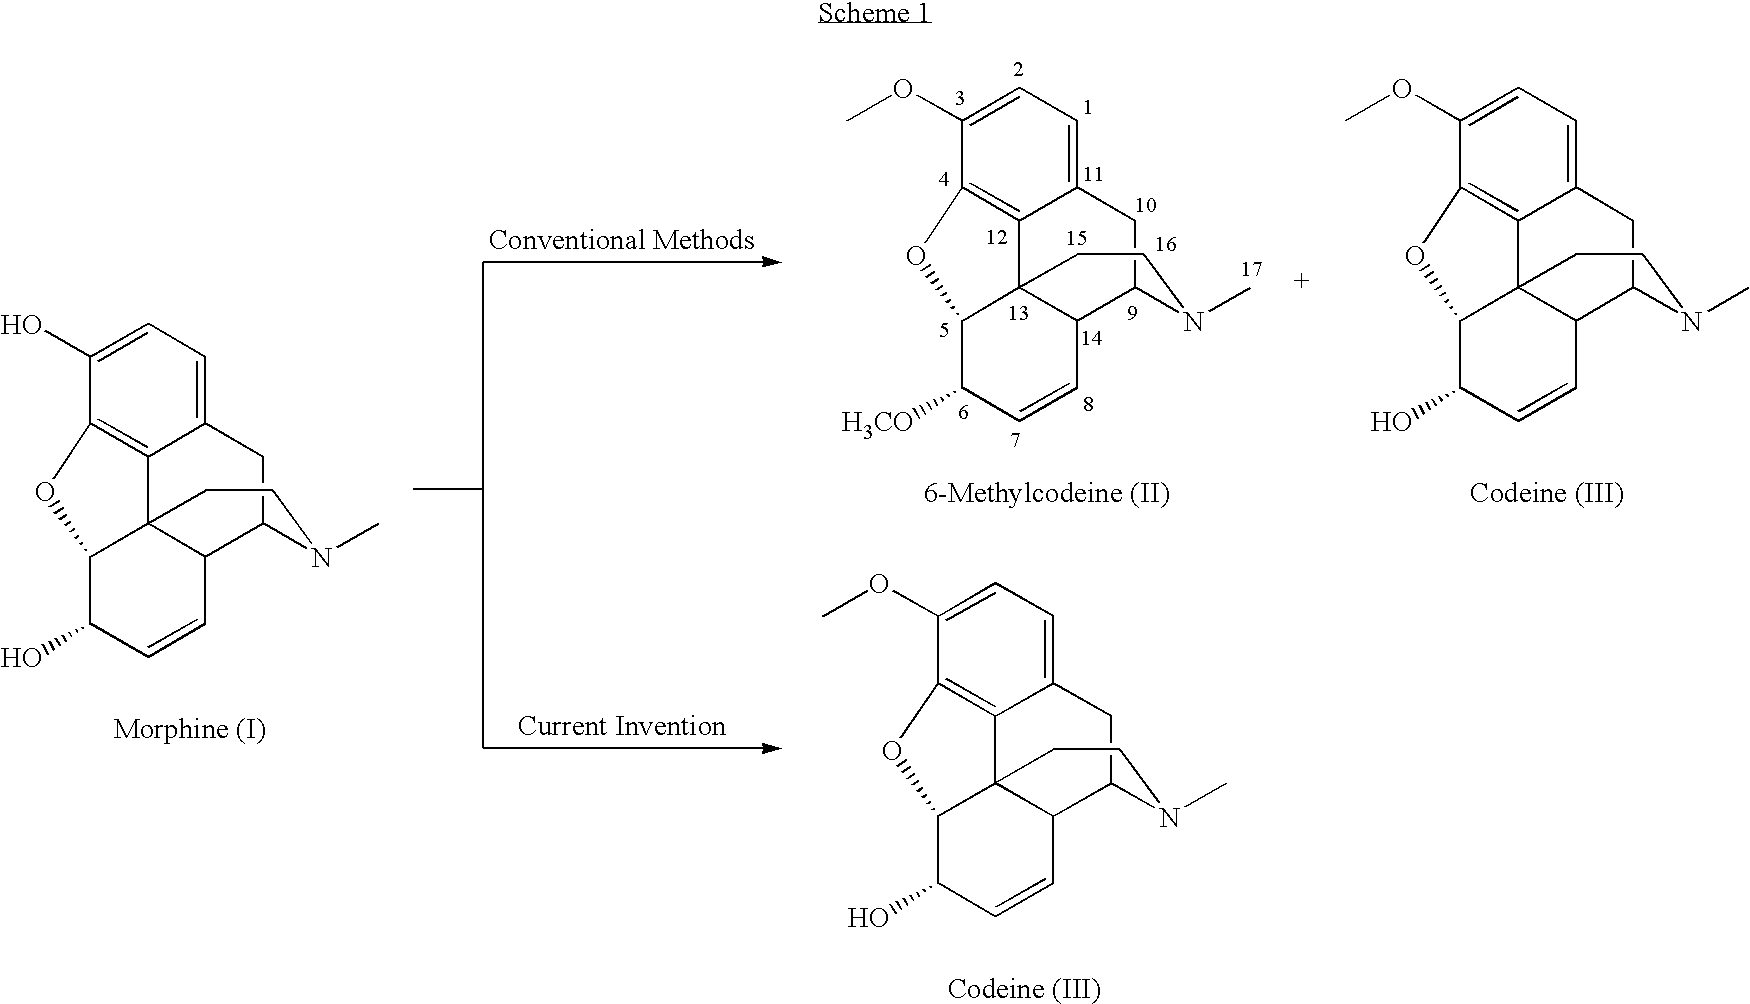 Process for the production of opiates